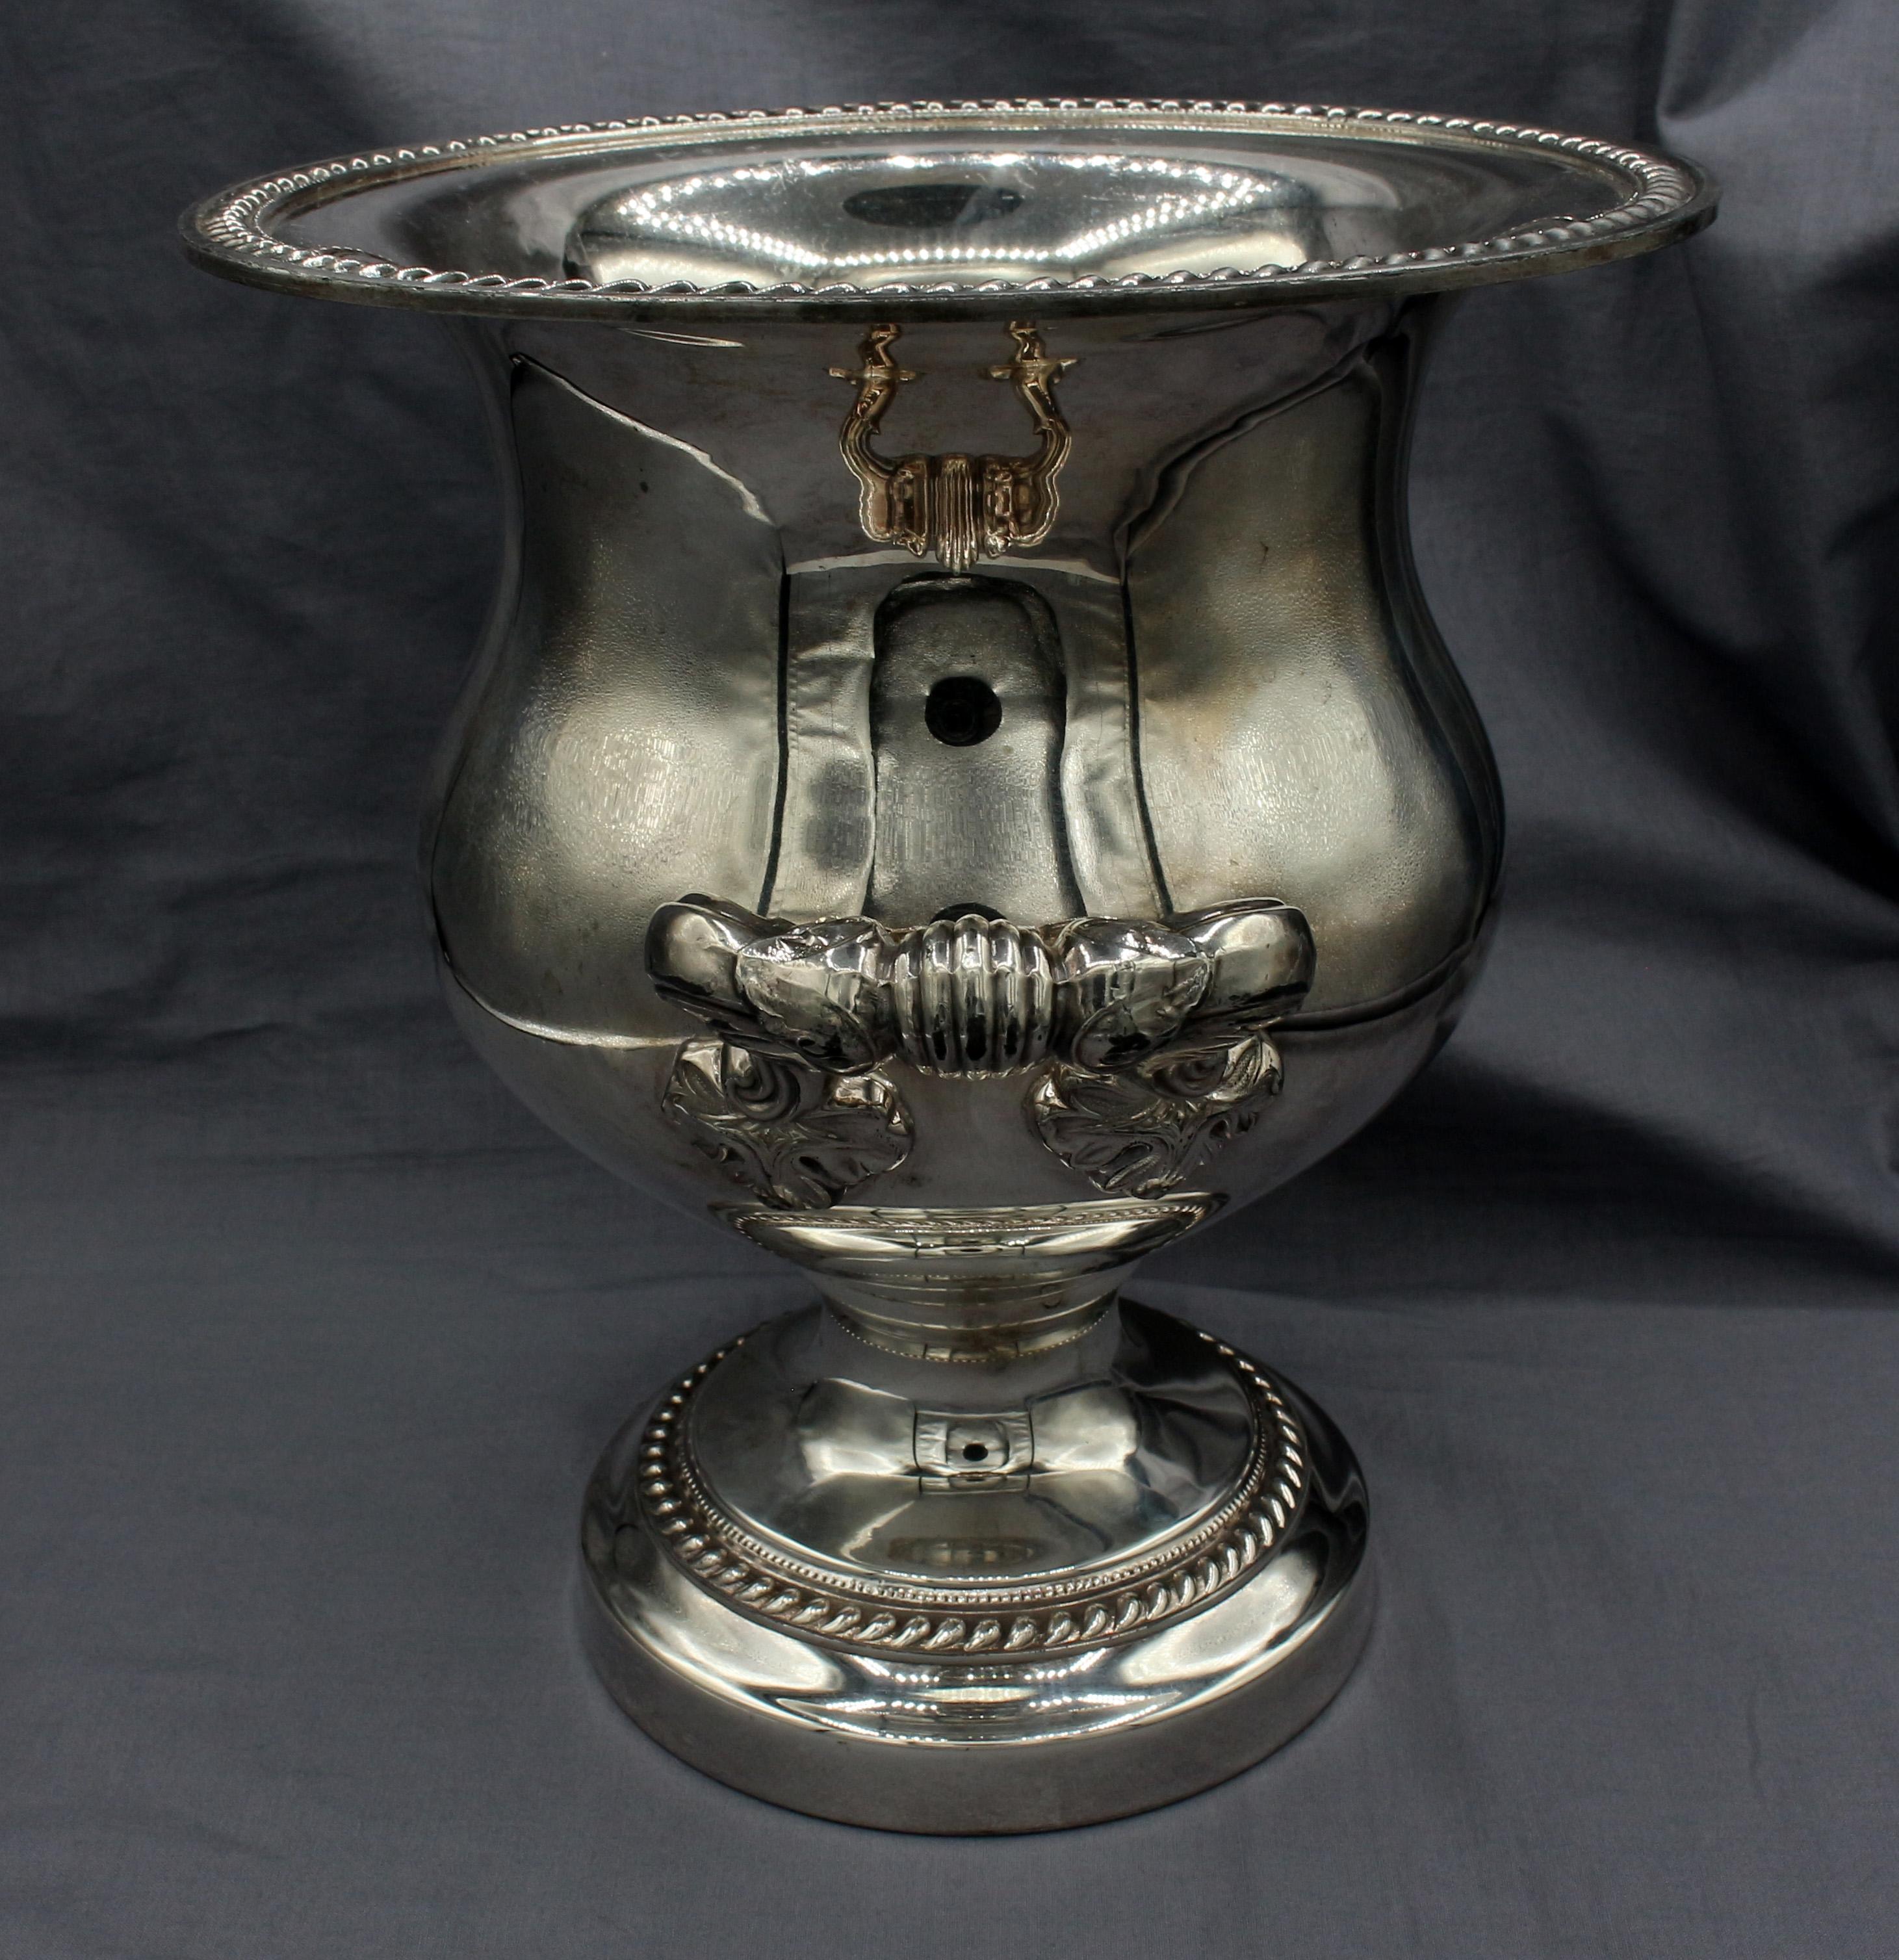 Mid-20th century English silver plated champagne cooler. Classical design with bold acanthus motif handles & repetitive motif borders. Provenance: Councill family of furniture making in N.C.
11